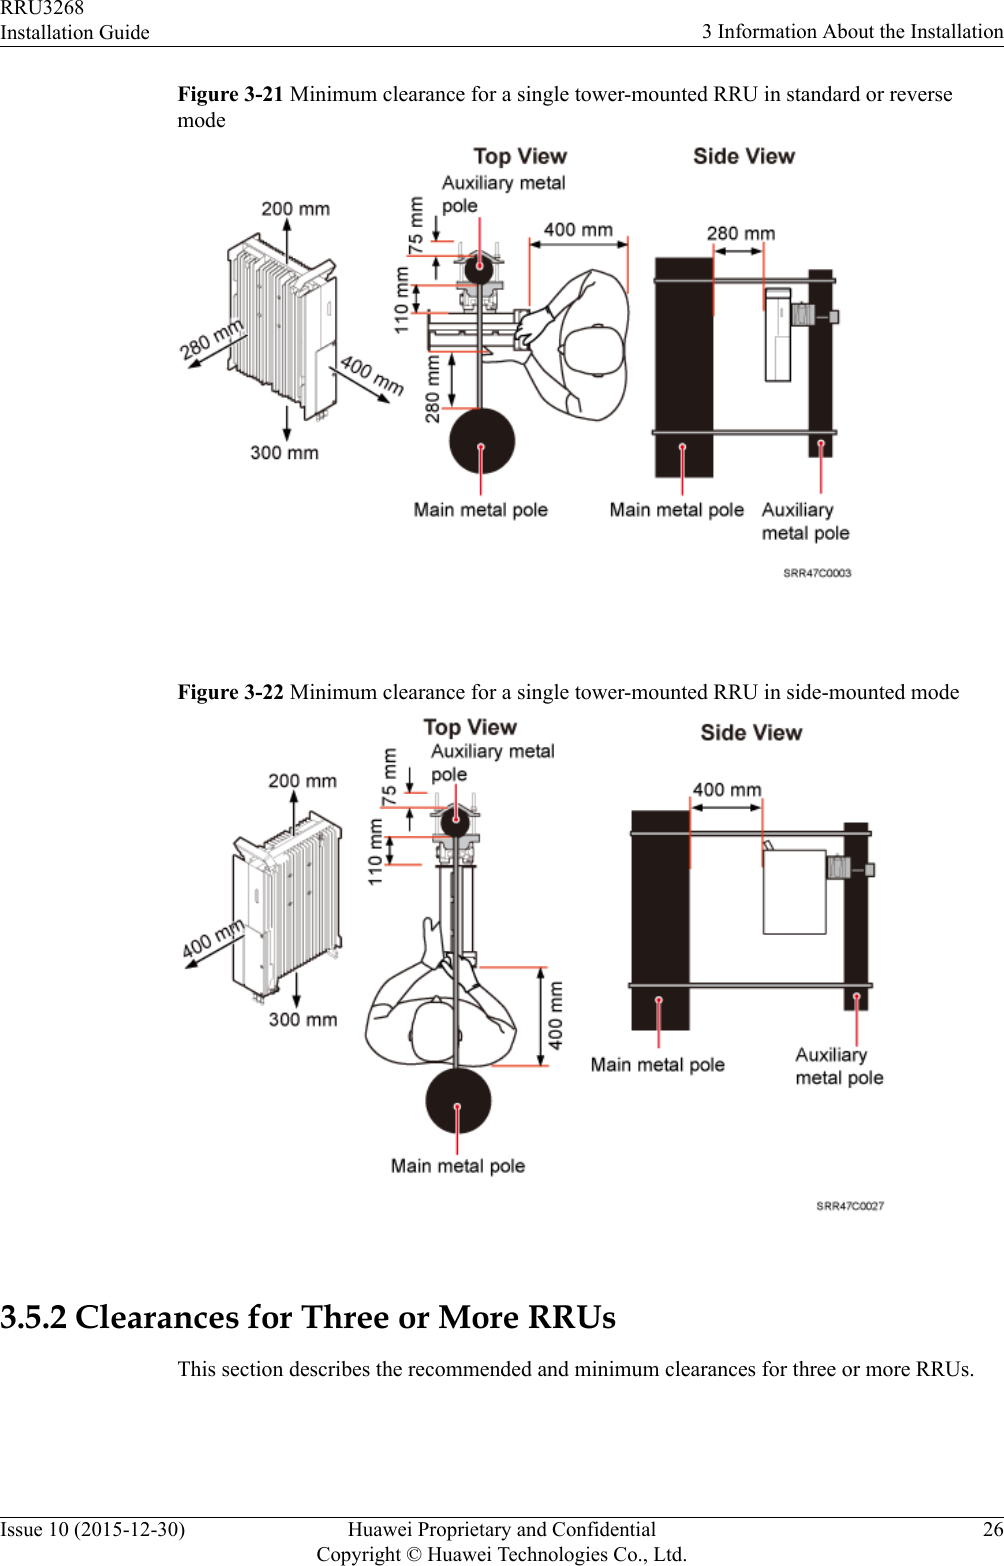 Figure 3-21 Minimum clearance for a single tower-mounted RRU in standard or reversemode Figure 3-22 Minimum clearance for a single tower-mounted RRU in side-mounted mode 3.5.2 Clearances for Three or More RRUsThis section describes the recommended and minimum clearances for three or more RRUs.RRU3268Installation Guide 3 Information About the InstallationIssue 10 (2015-12-30) Huawei Proprietary and ConfidentialCopyright © Huawei Technologies Co., Ltd.26